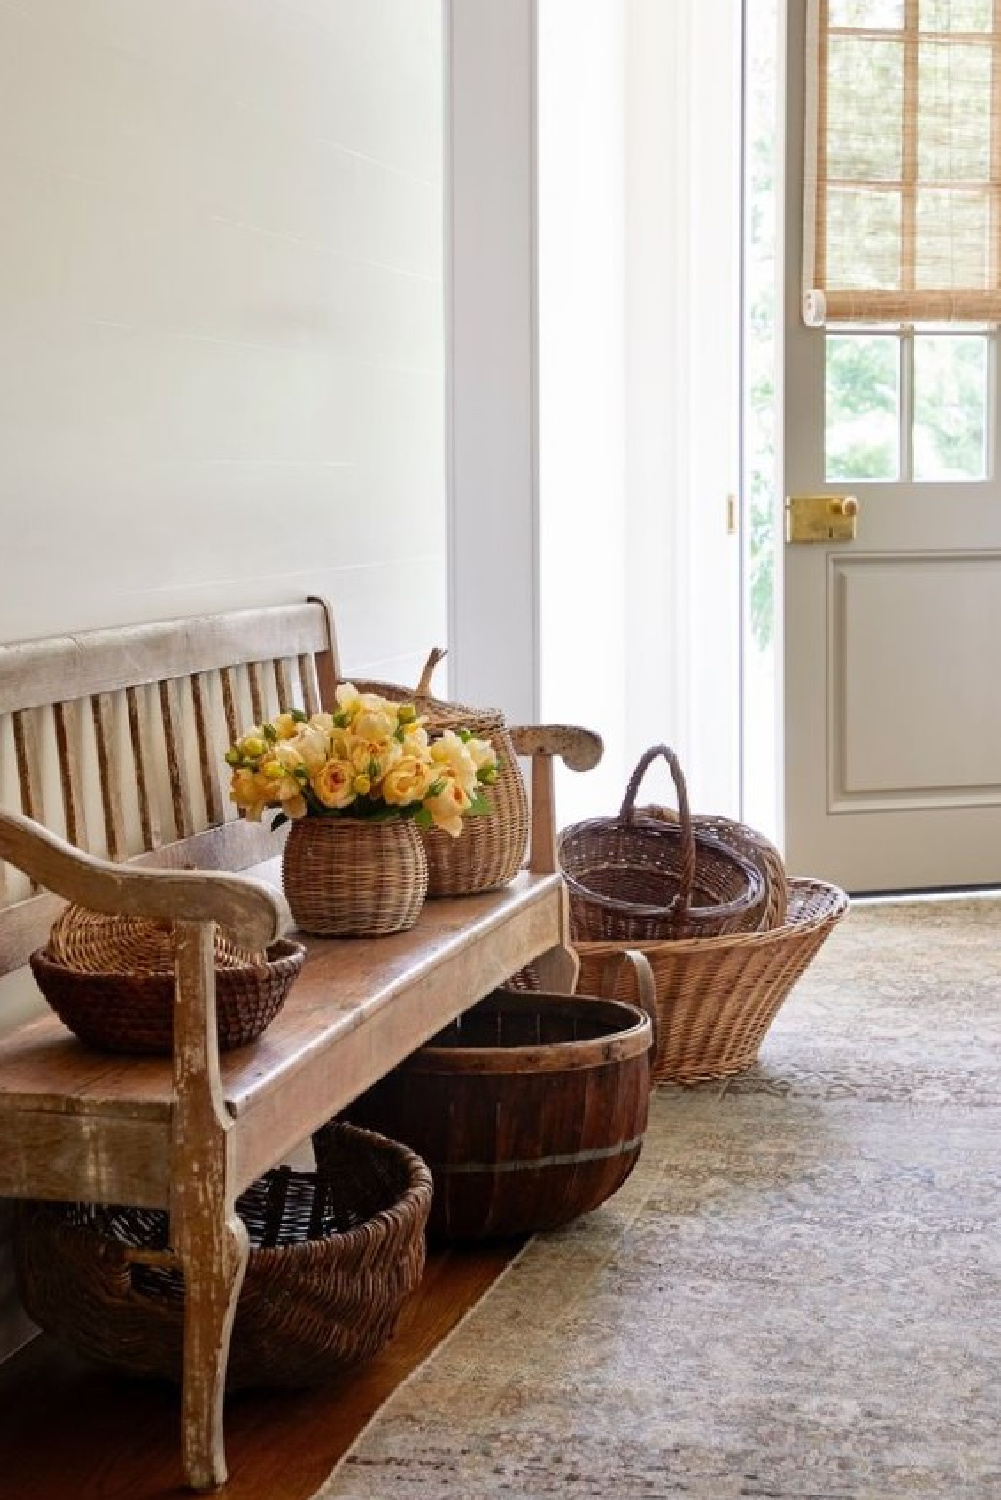 Baskets in a serene entry area with bench. Timeless interior design by Shannon Bowers with nods to European antiques, patina, understated elegance, and sophisticated simplicity. #shannonbowers #timelessinteriors